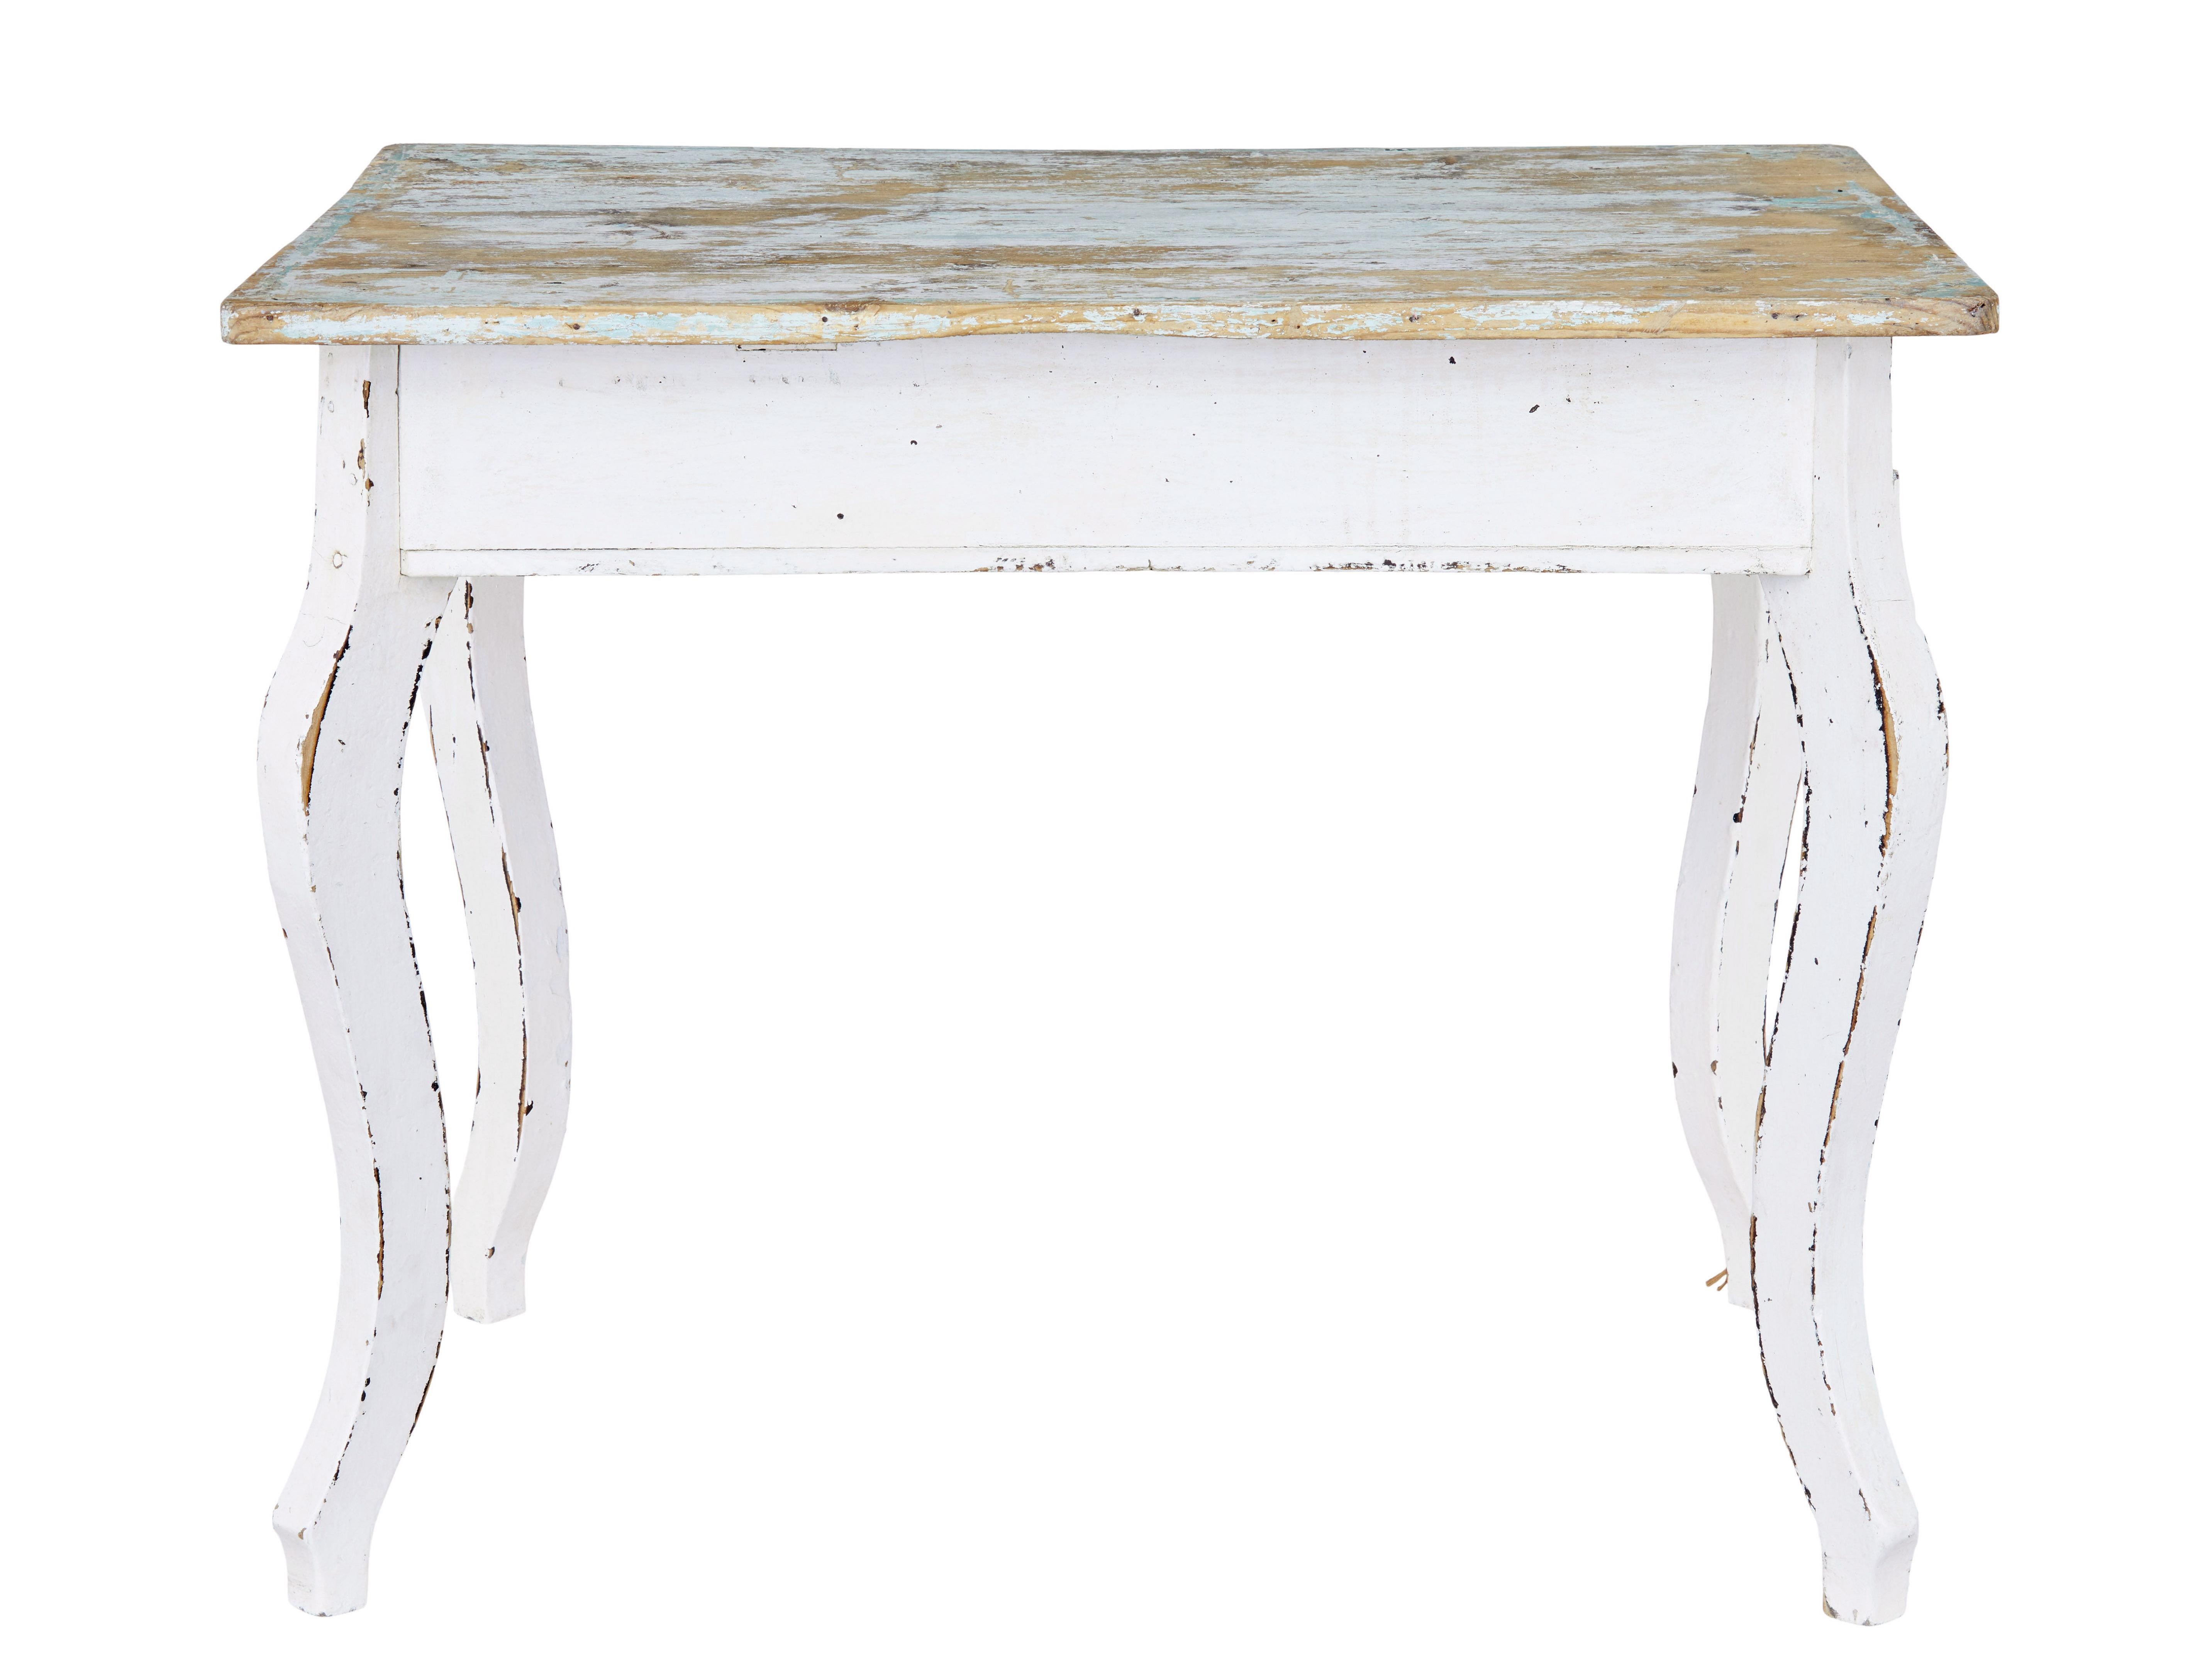 Scandinavian painted pine occasional table circa 1890.

Functional table which could serve many purposes around the home, such as a hall/side table or even as a small kitchen table with it's knee clearance of 24 1/2